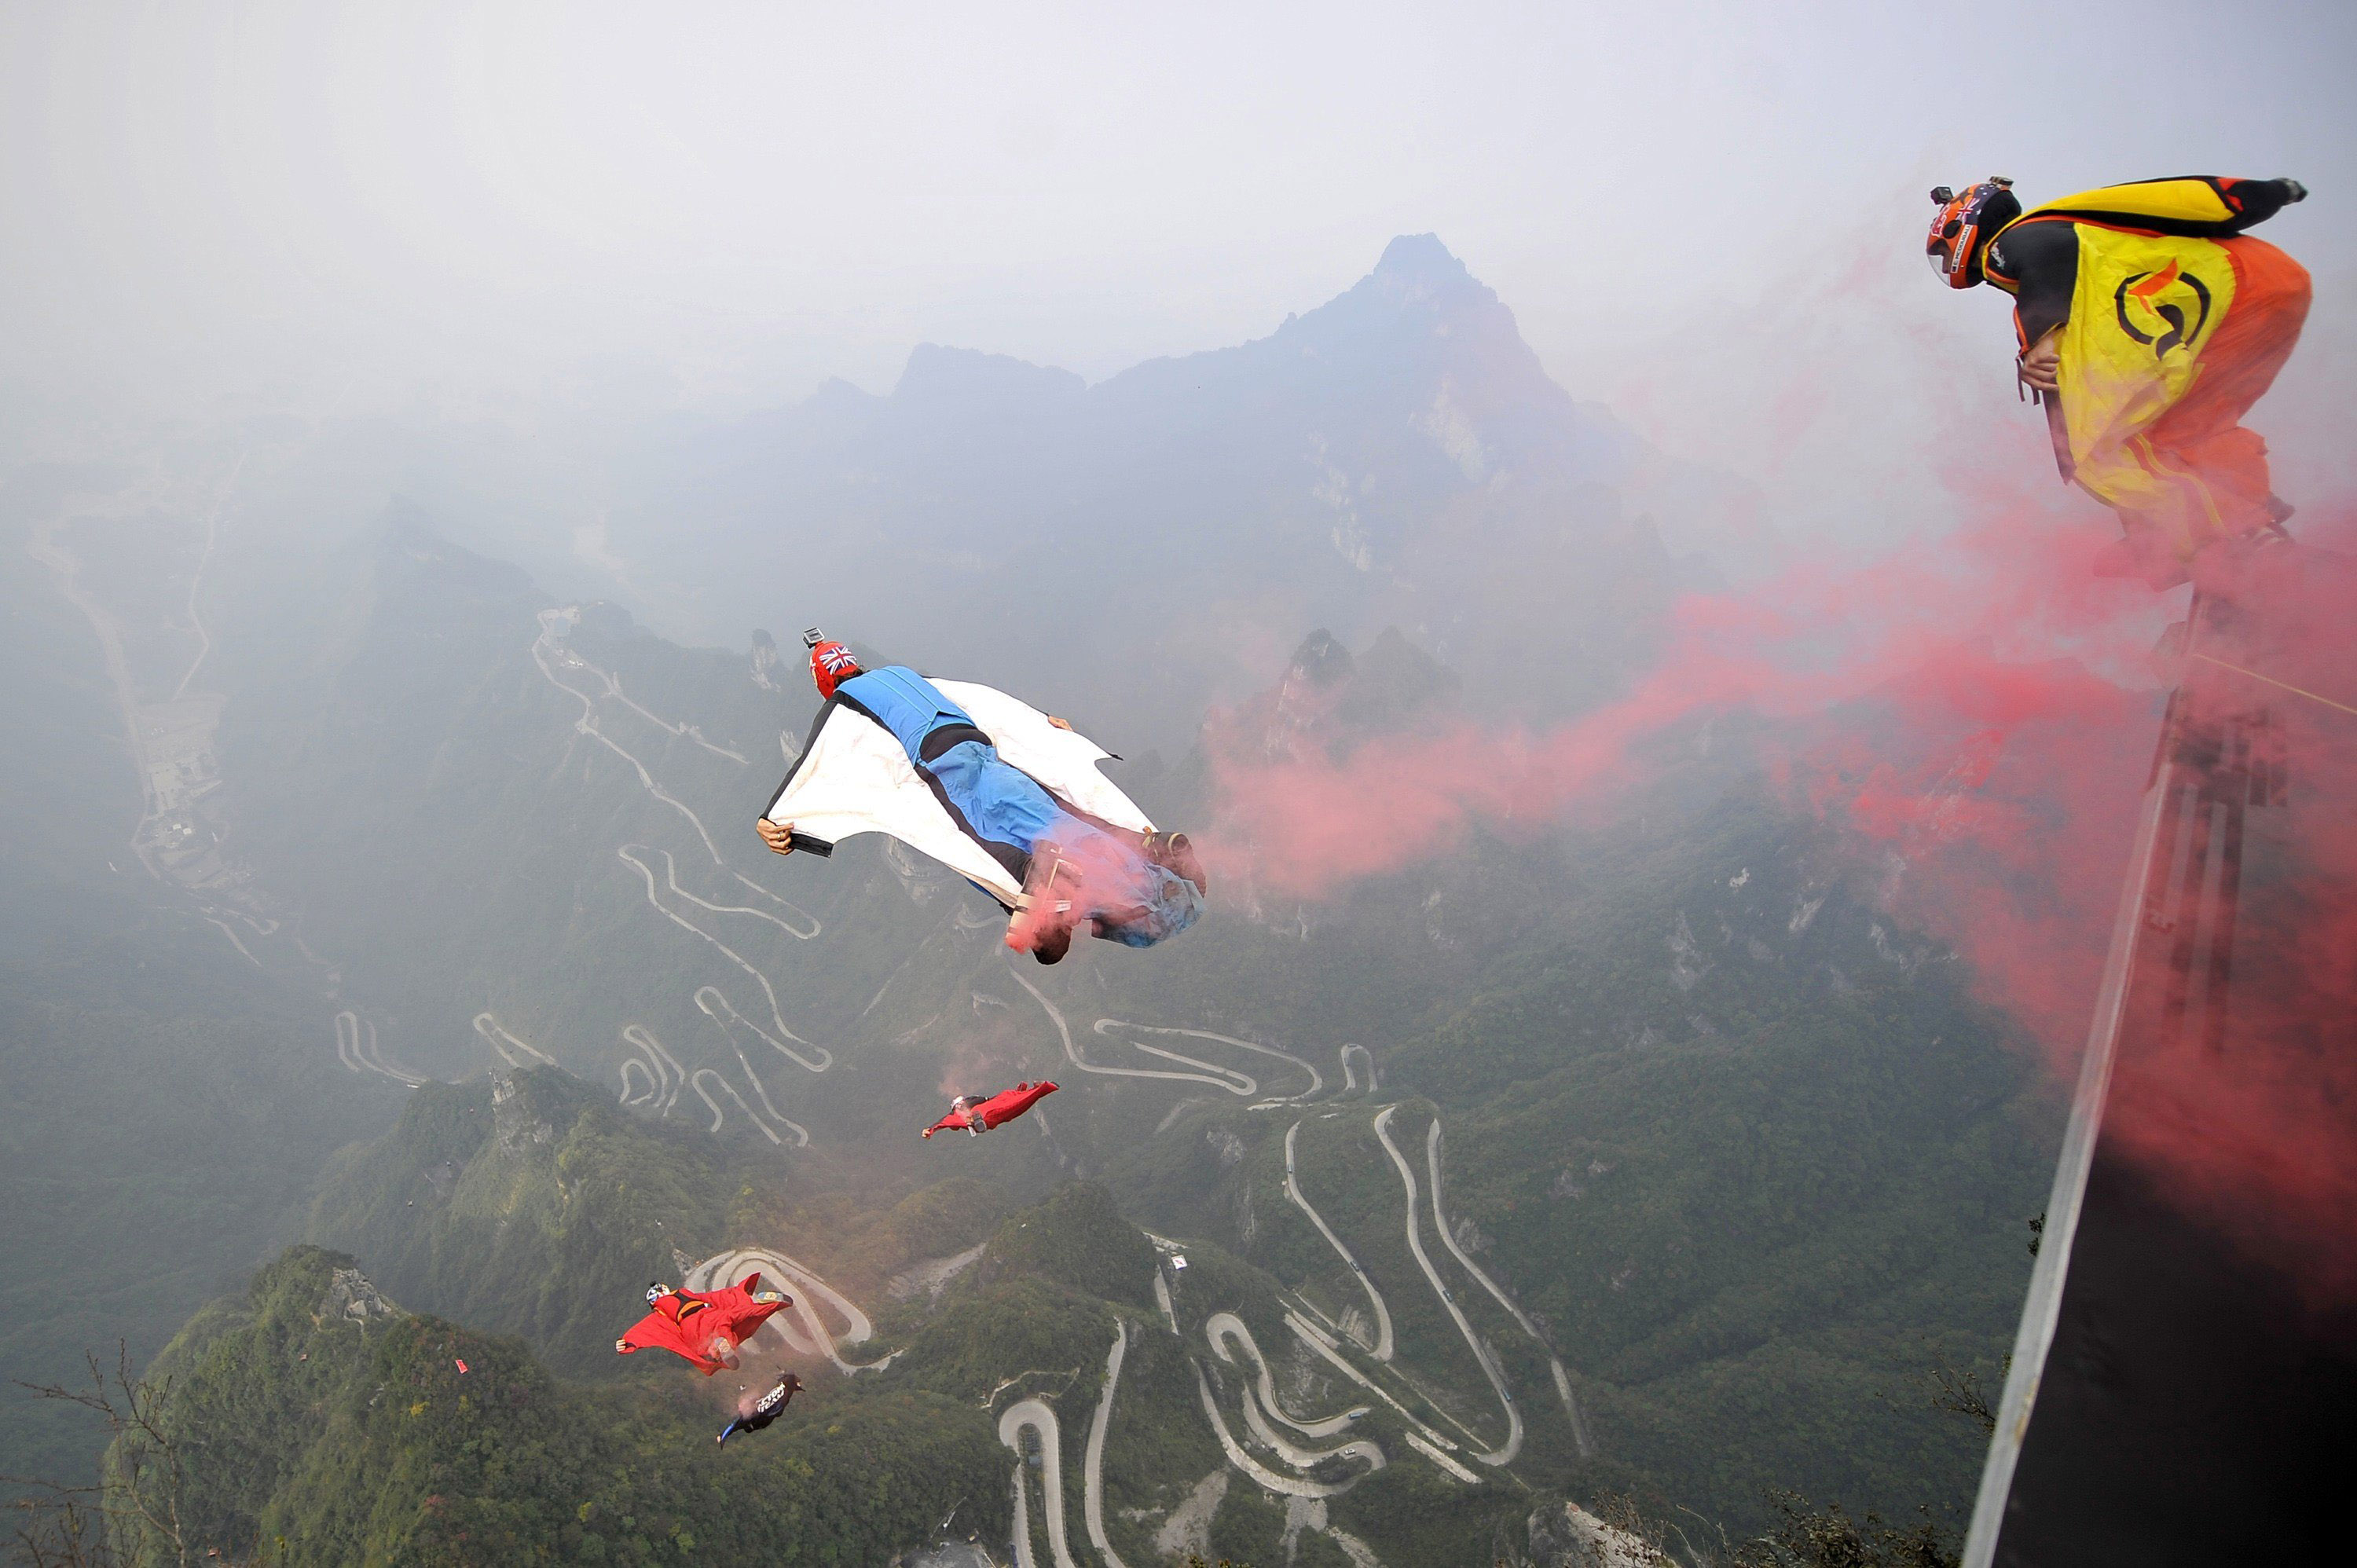 Wingsuit flyer contestants jump off a mountain at Tianmen Mountain National Park in Zhangjiajie, Hunan province, China on Oct. 19, 2014.